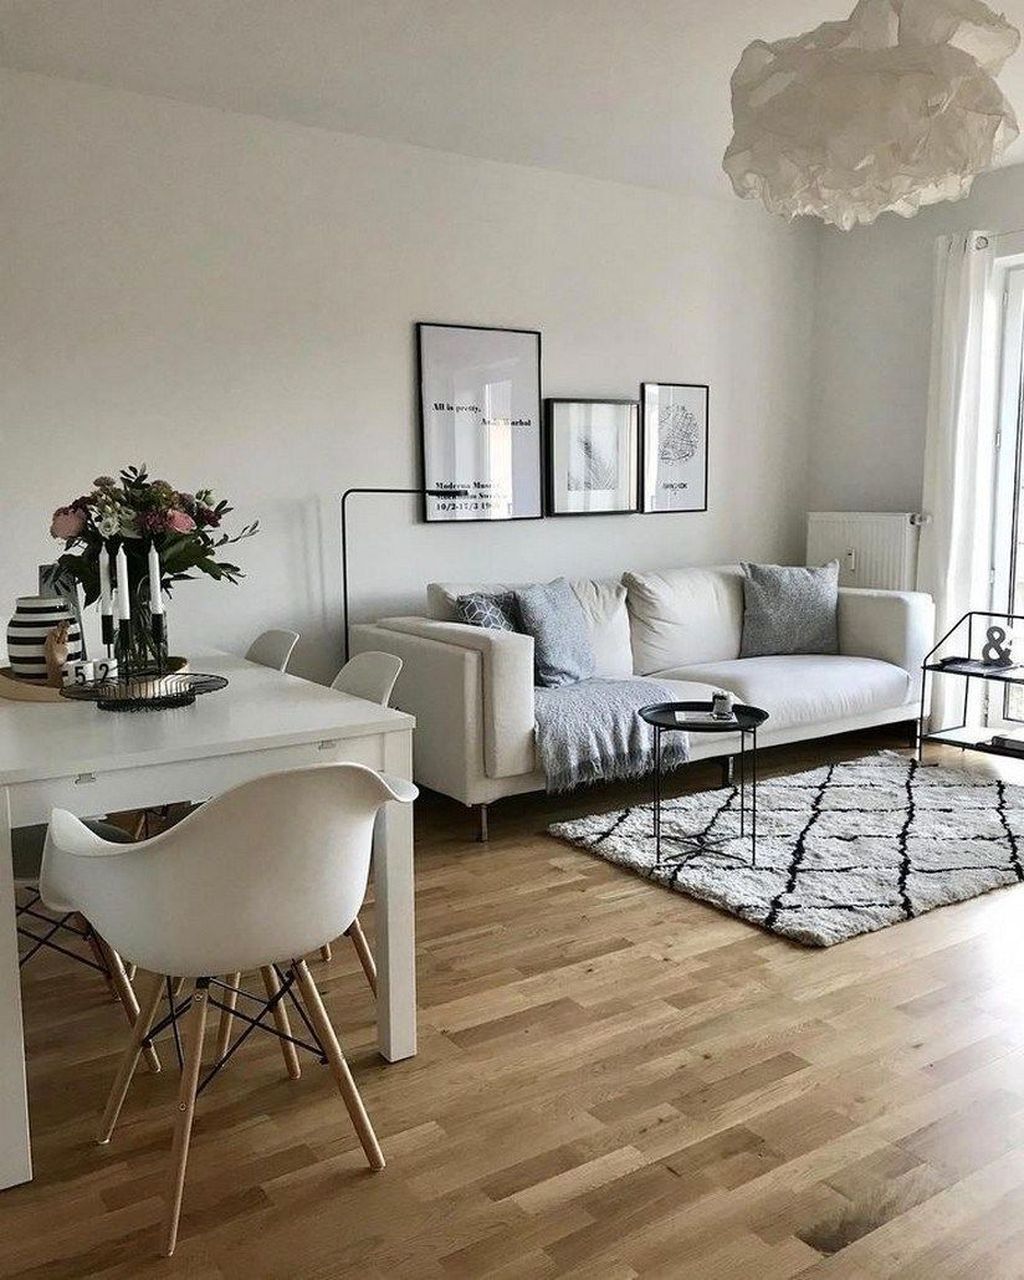 32 Brilliant Small Apartment Decorating Ideas You Need To Try - HOMYHOMEE